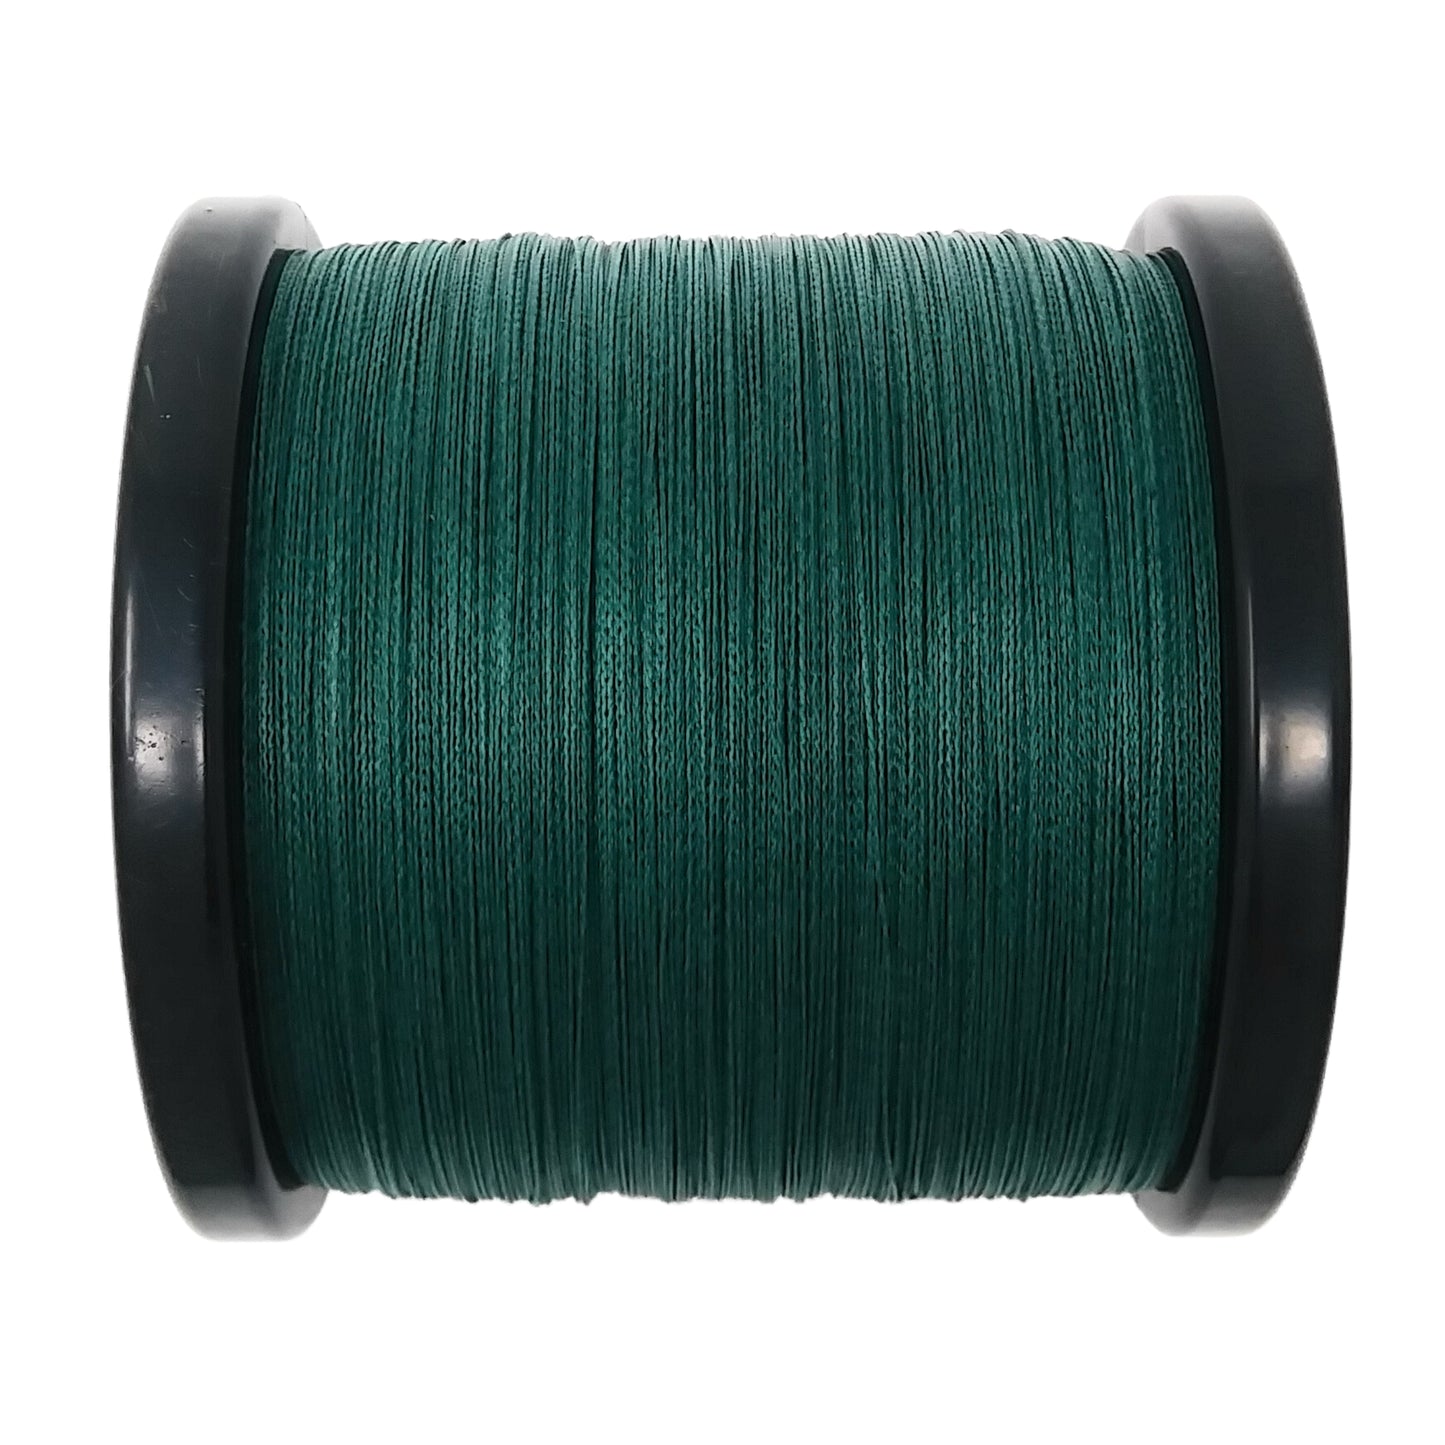 Reaction Tackle Braided Fishing Line Moss Green 20lb 1500yd